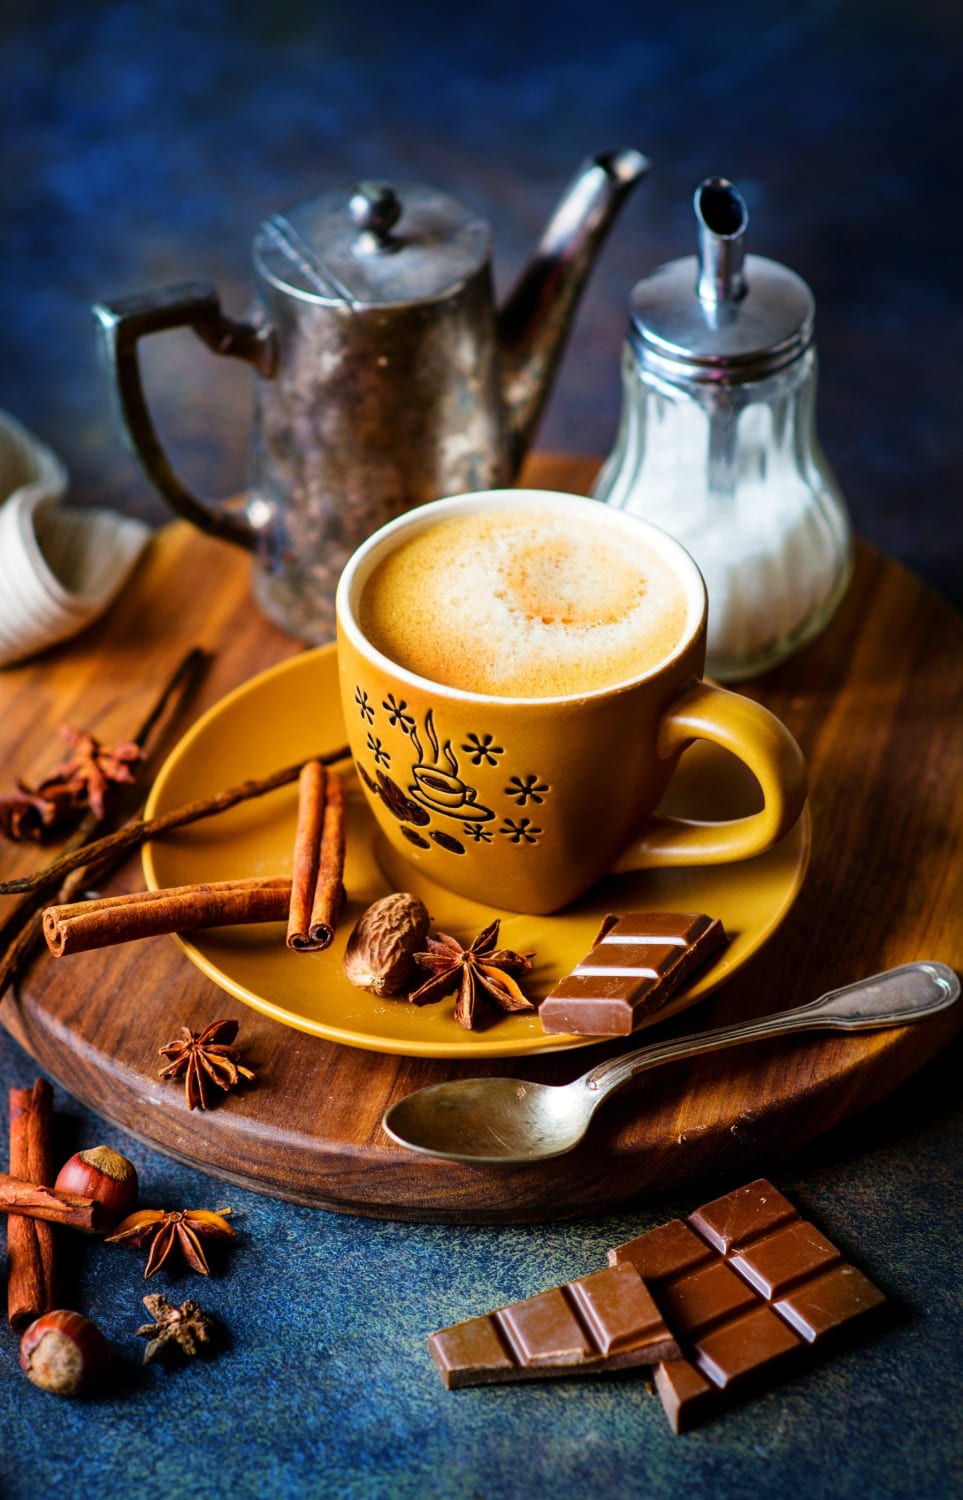 Pin by Carolina Mottl on coffee | Coffee photography, Chocolate coffee, Coffee pictures